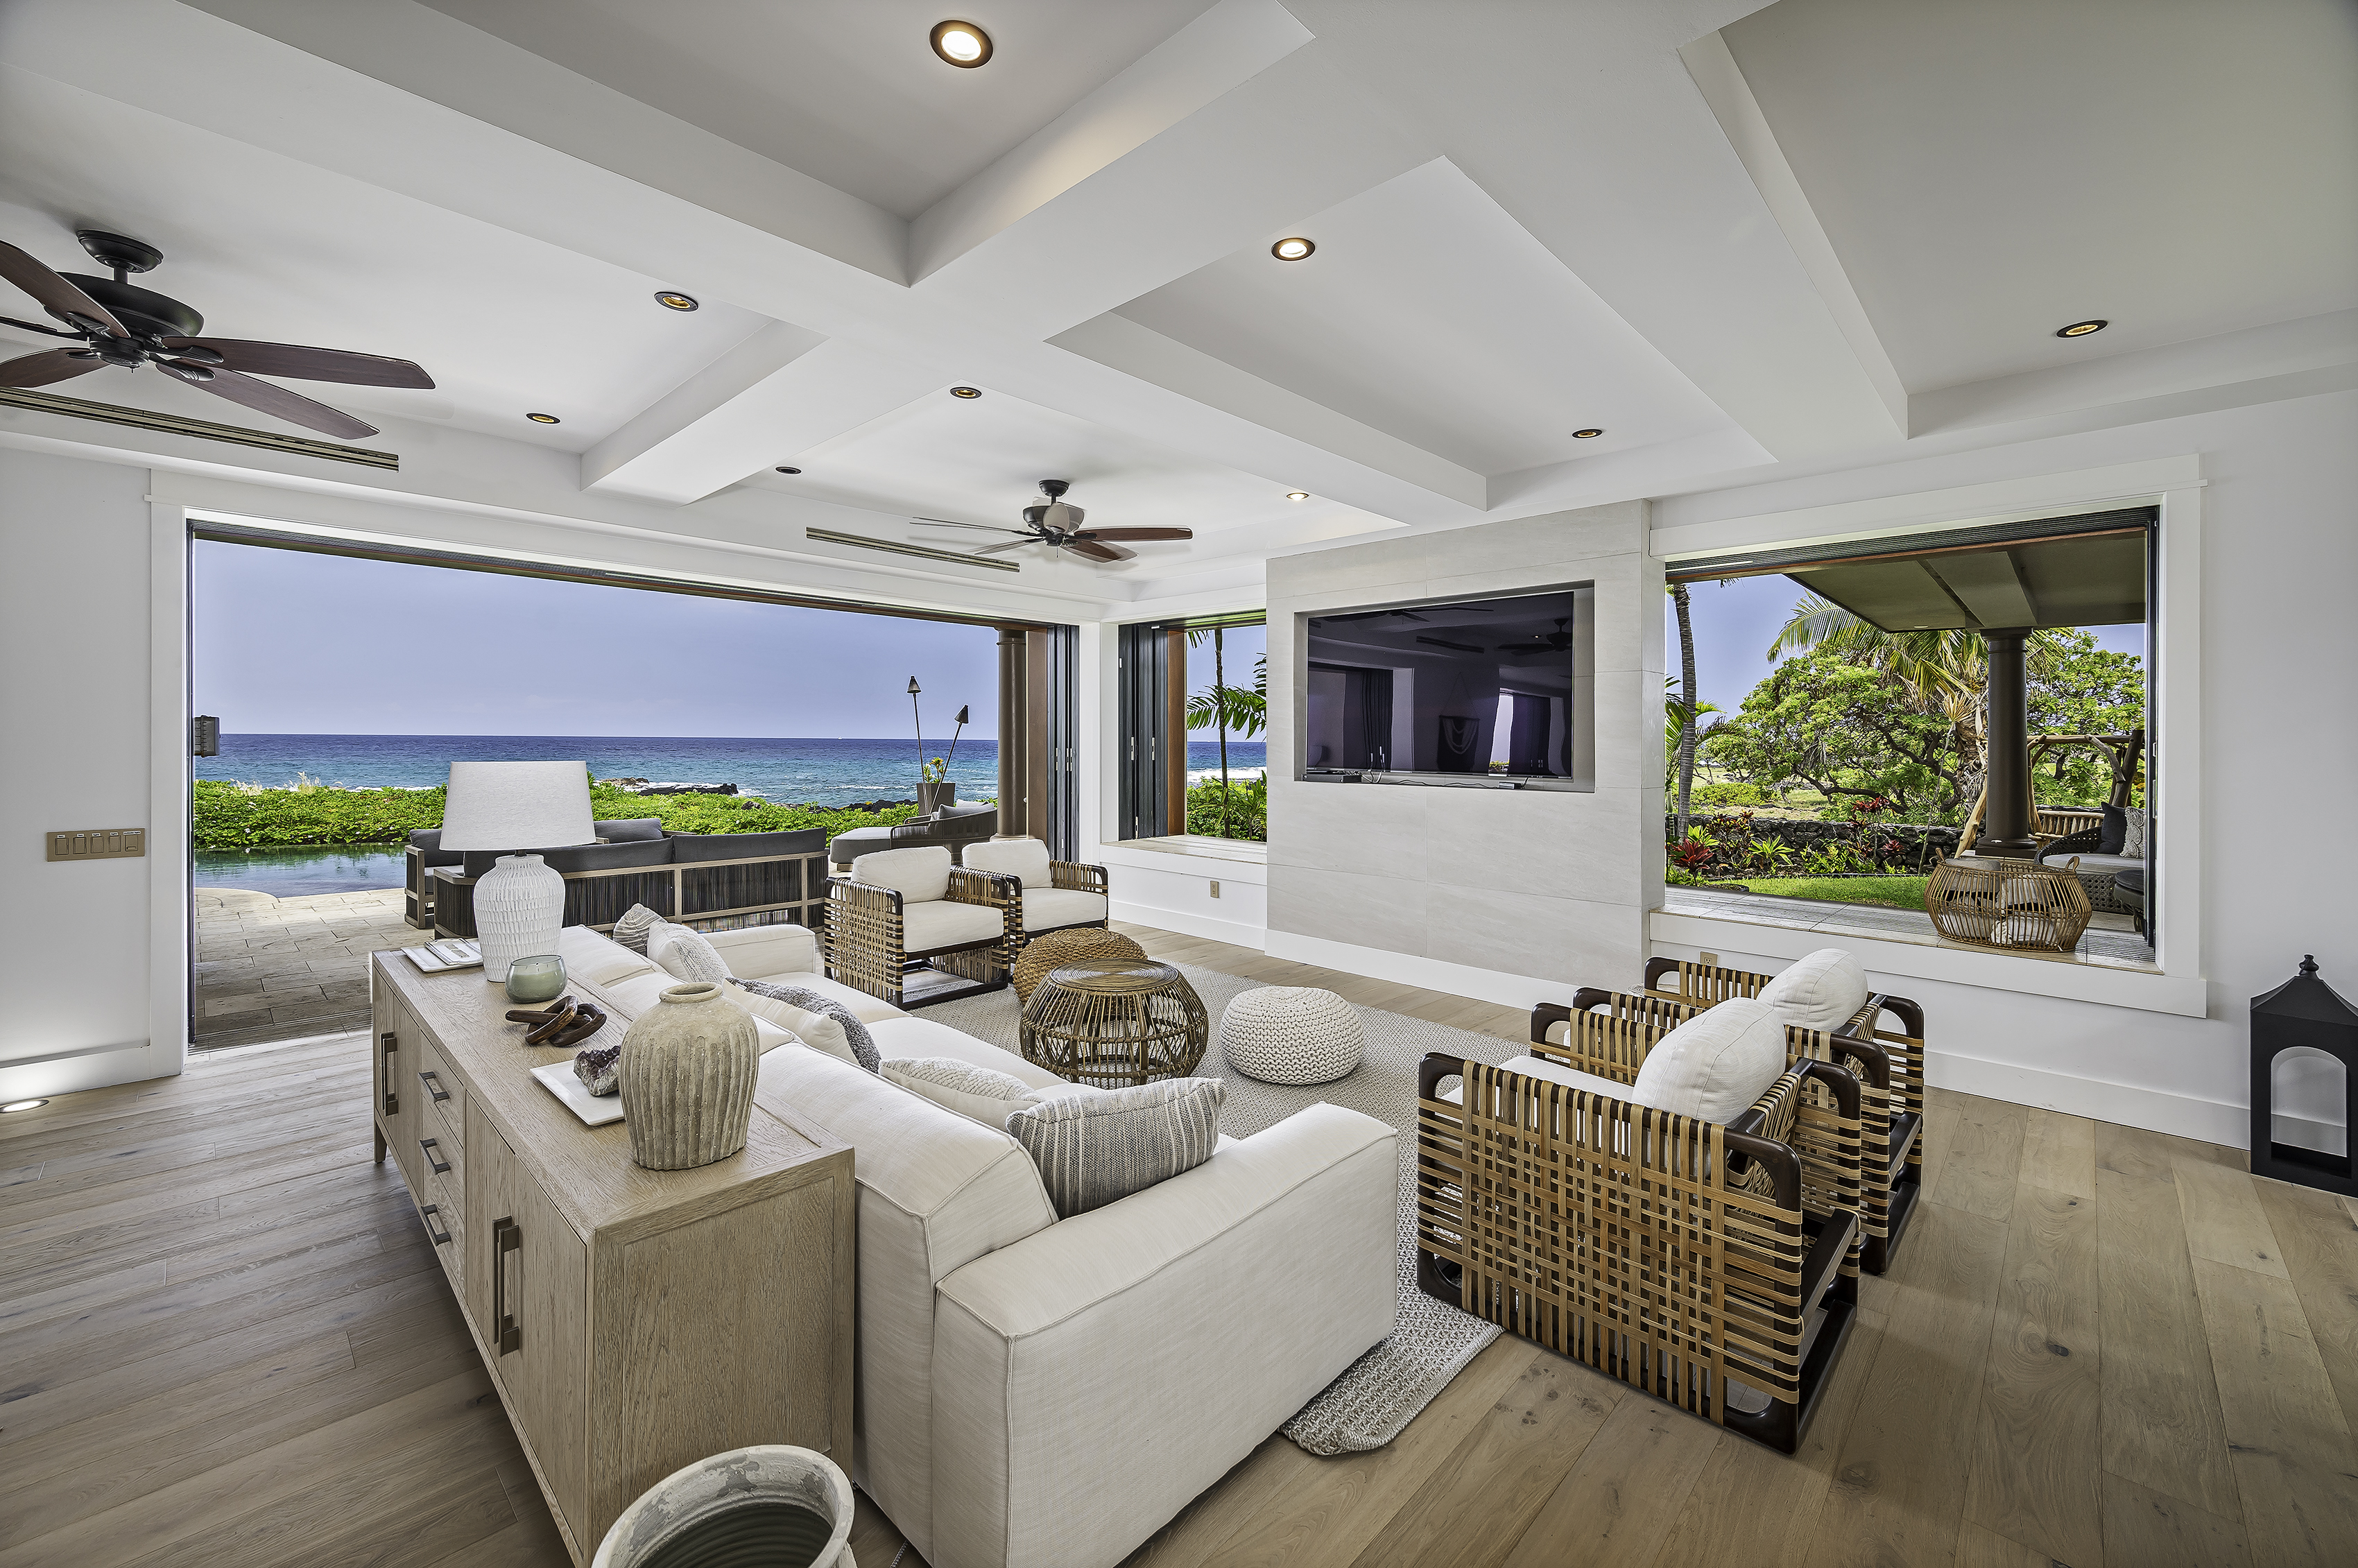 Alohi Kai Estate (Shining Sea) was artisan designed to offer you 180 degrees of ocean front shoreline, while relaxing in 7,000+ square feet of elegant living space